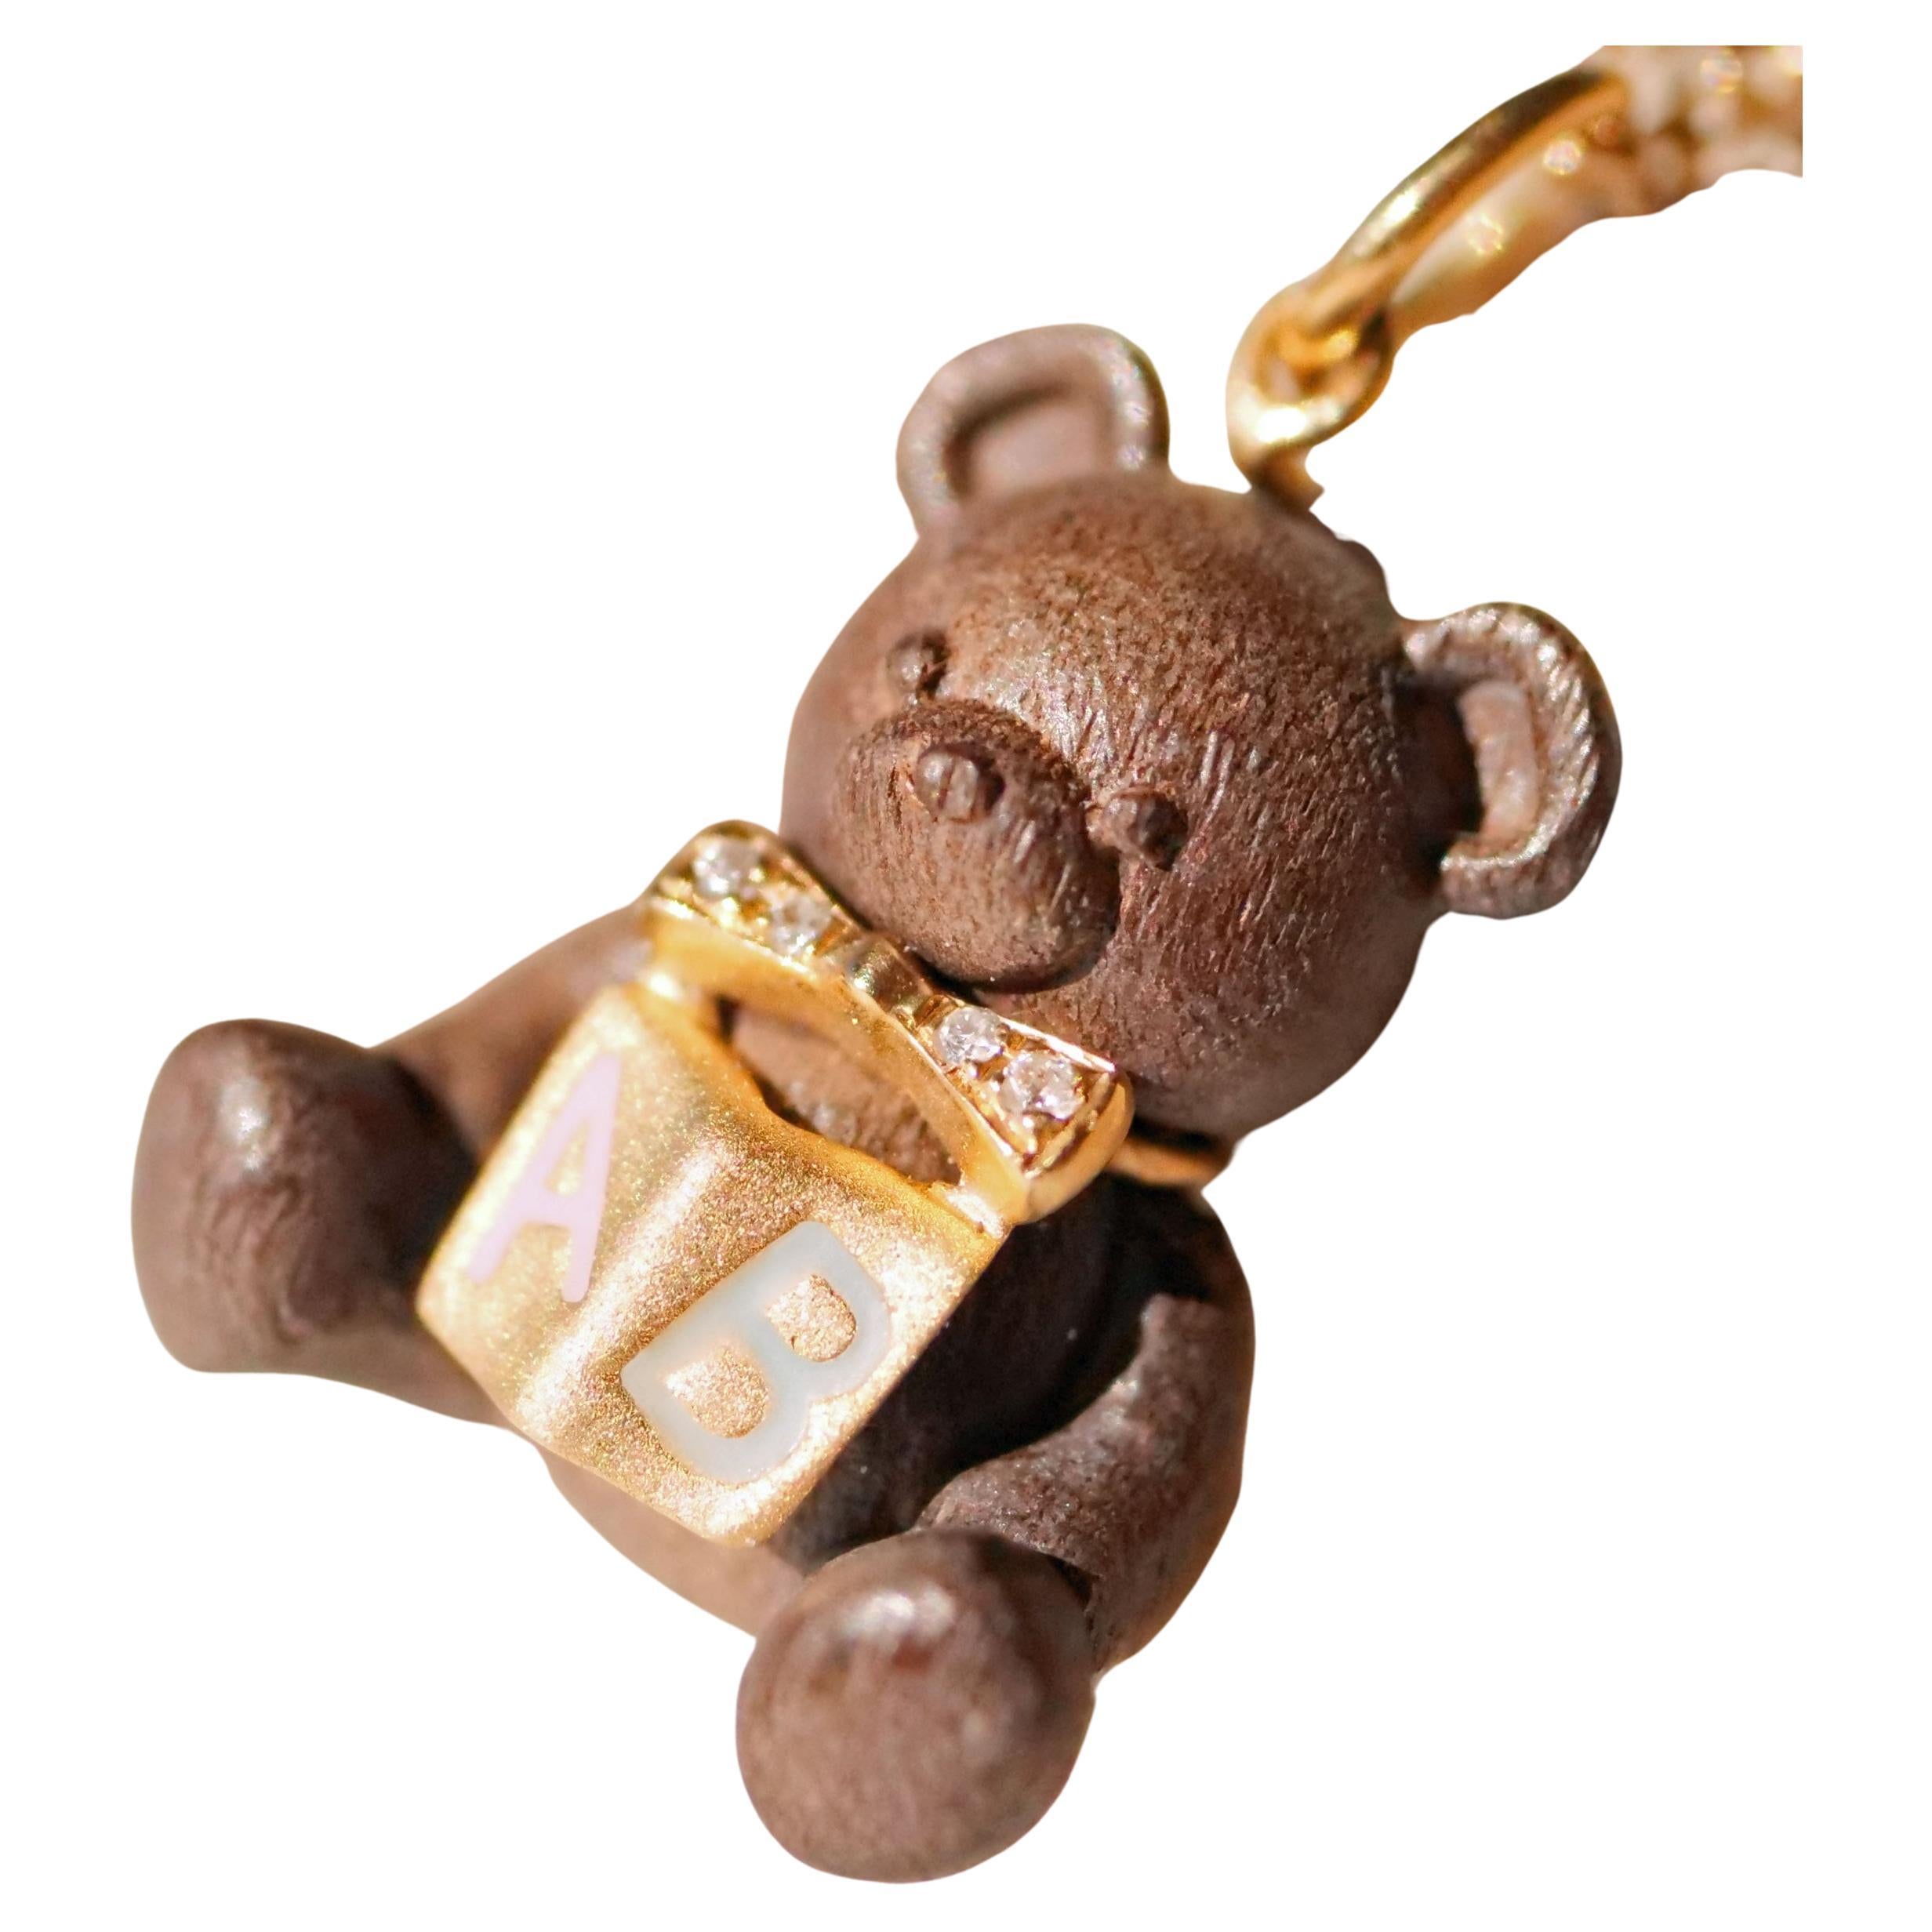 a high quality, detailed goldsmith work set with 4 full cut diamonds total approx. 0.01 ct, W / SI1-2, the cute teddy bear is made of precious wood and solid gold in 18 carat, with book (enamel letters A B in pink and blue) and bow applique in front